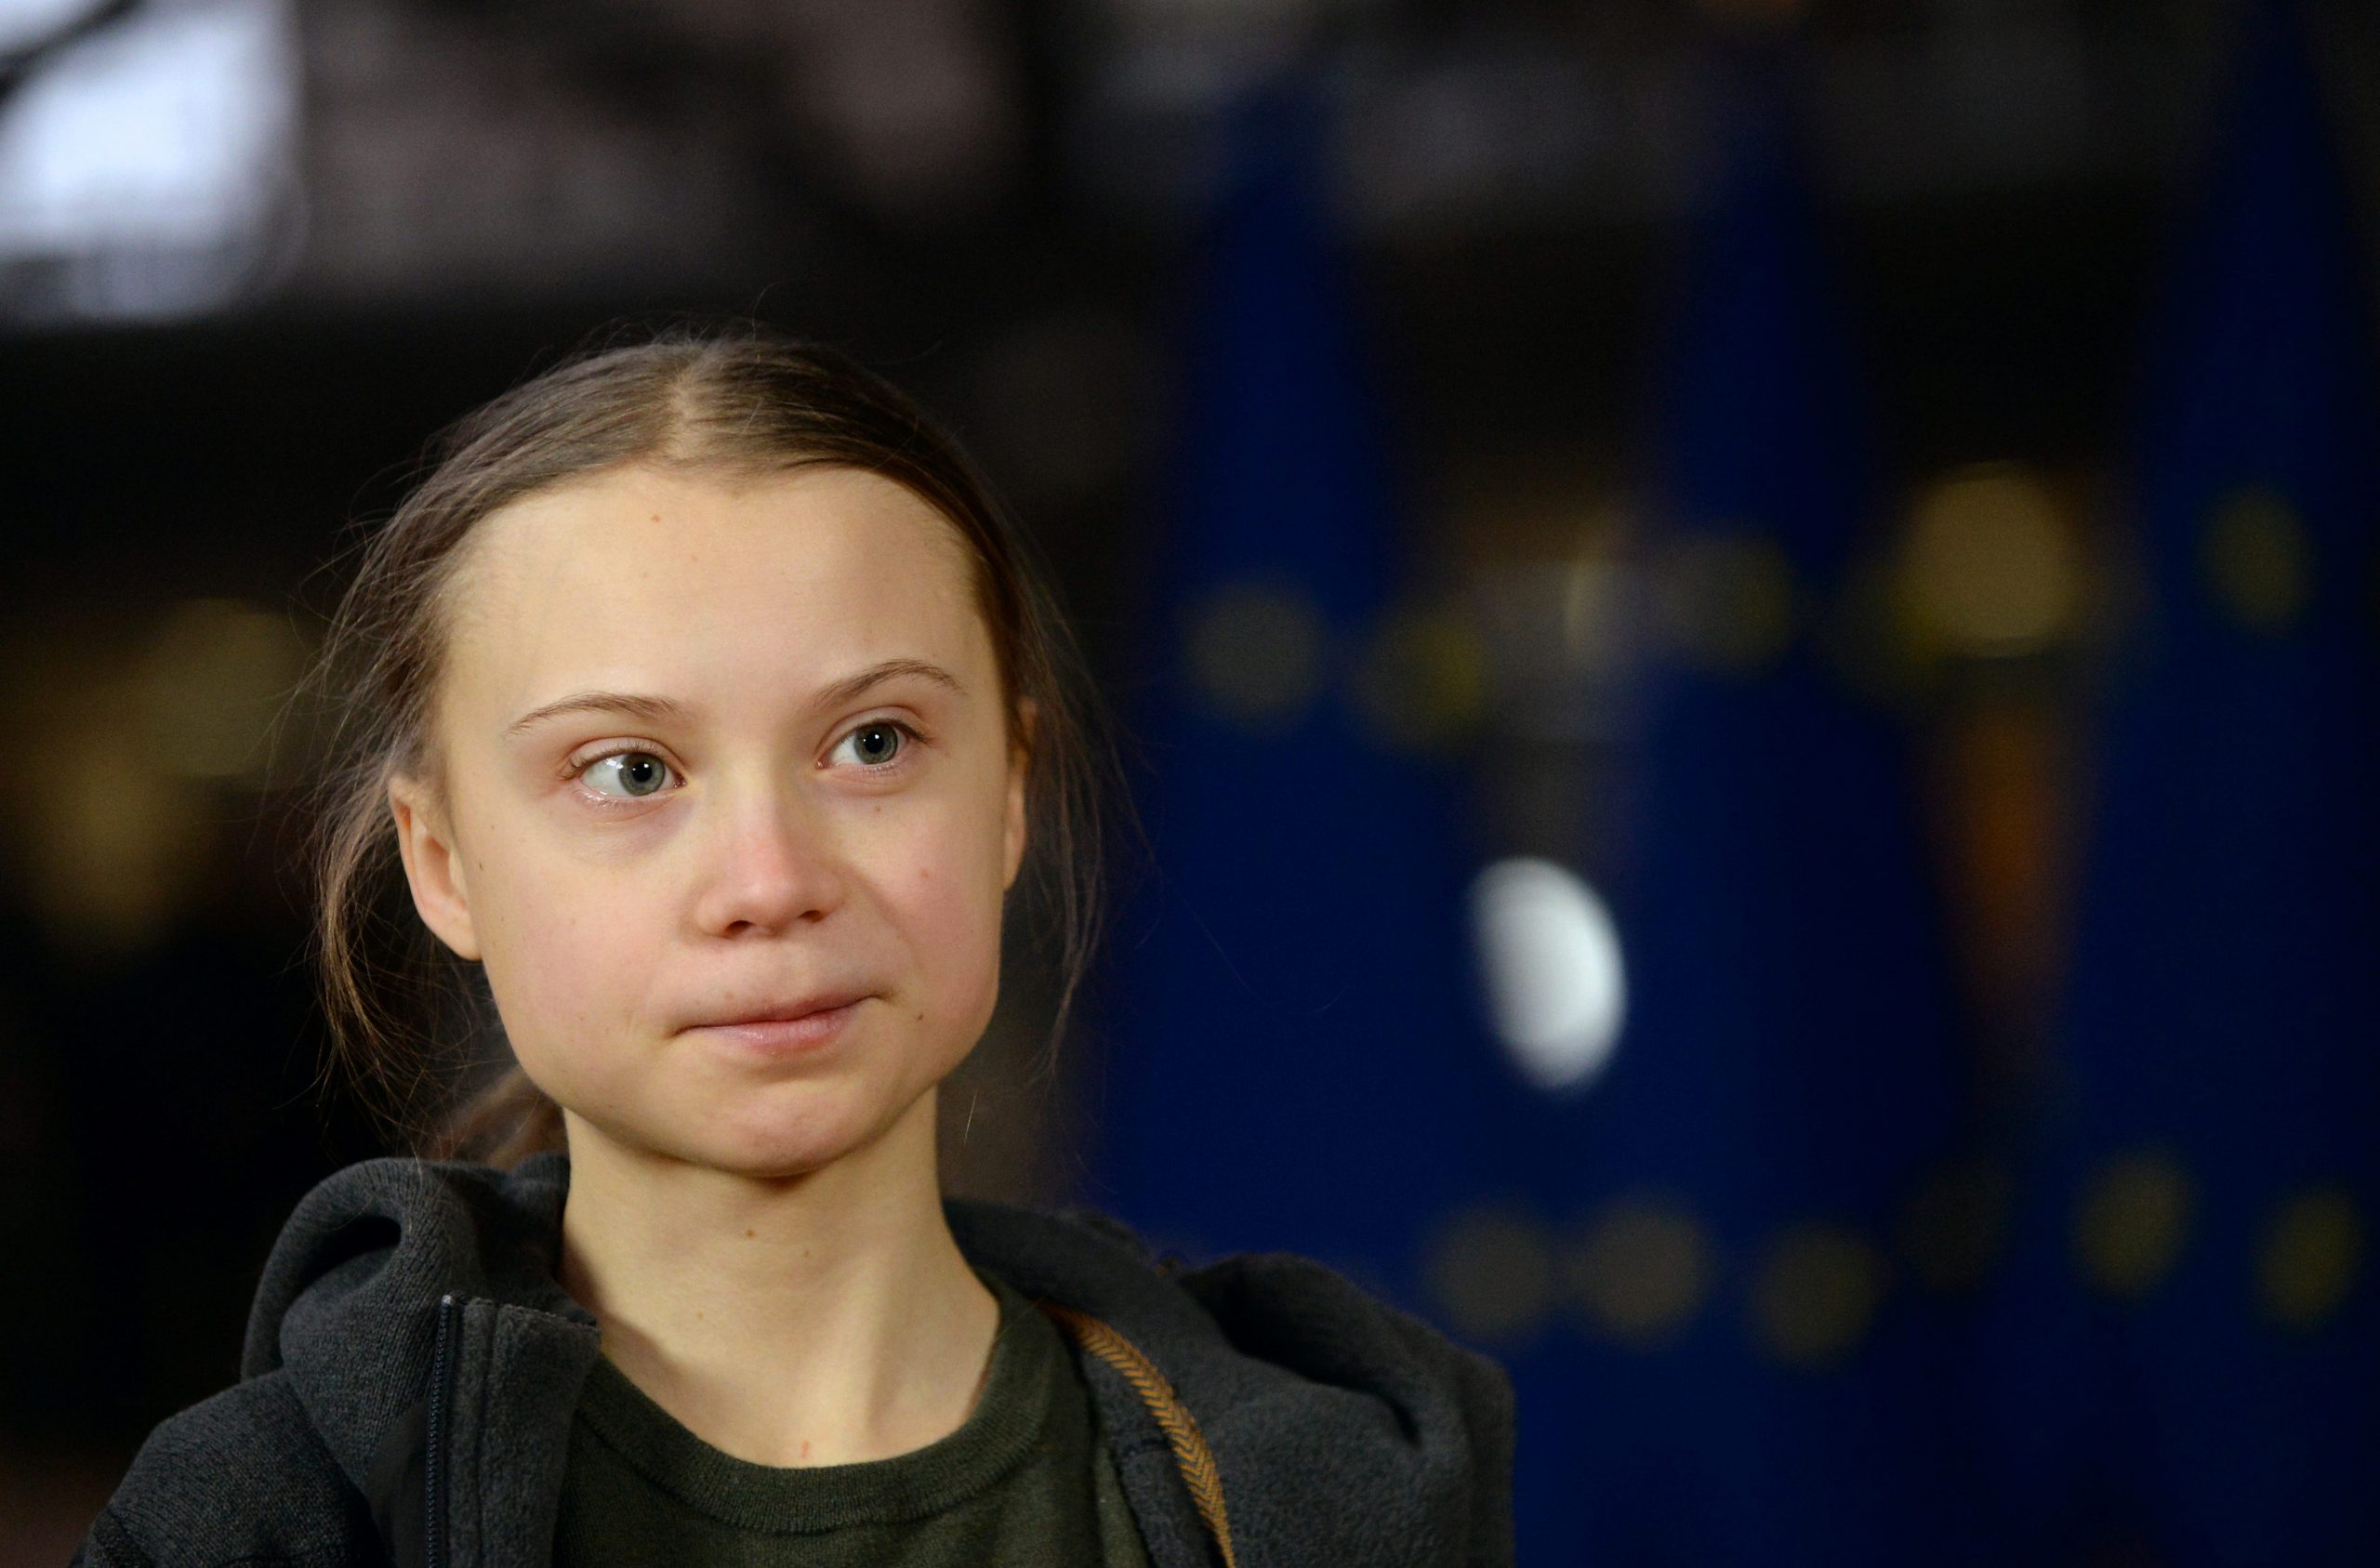 FILE PHOTO: Swedish climate activist Greta Thunberg talks to the media before meeting with EU environment ministers in Brussels, Belgium, March 5, 2020. REUTERS/Johanna Geron